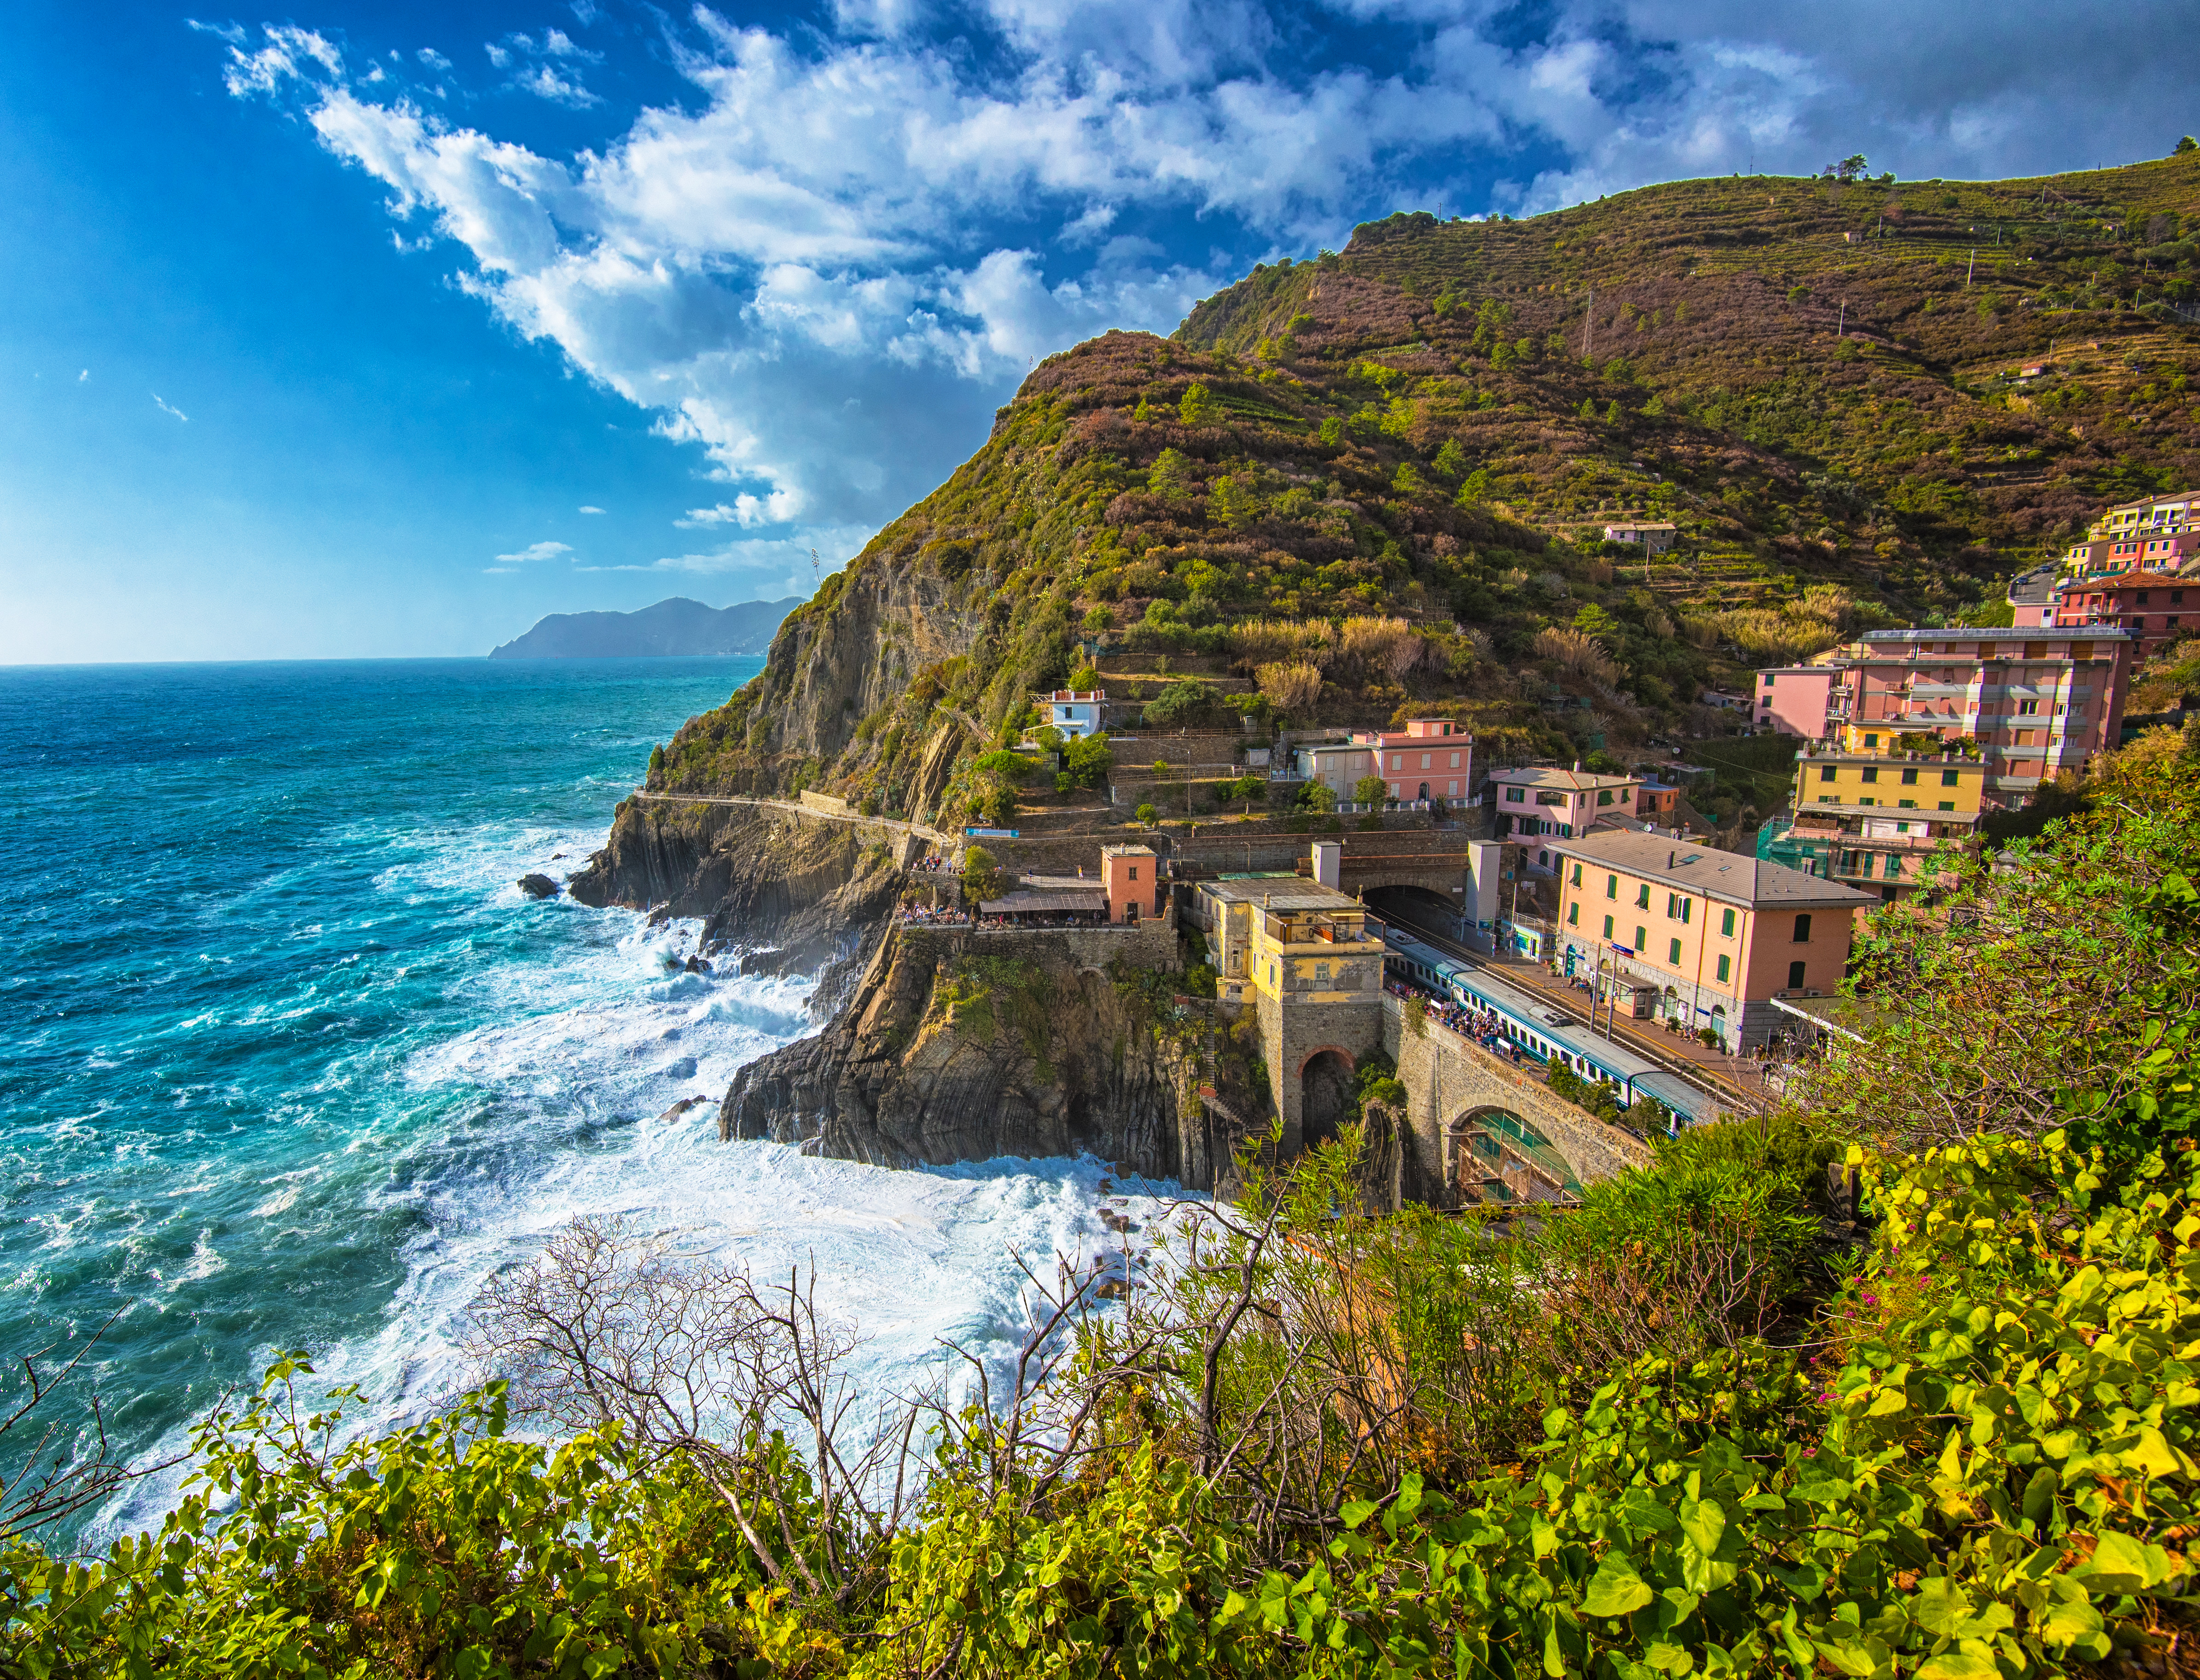 The beautiful scenery of Cinque Terre